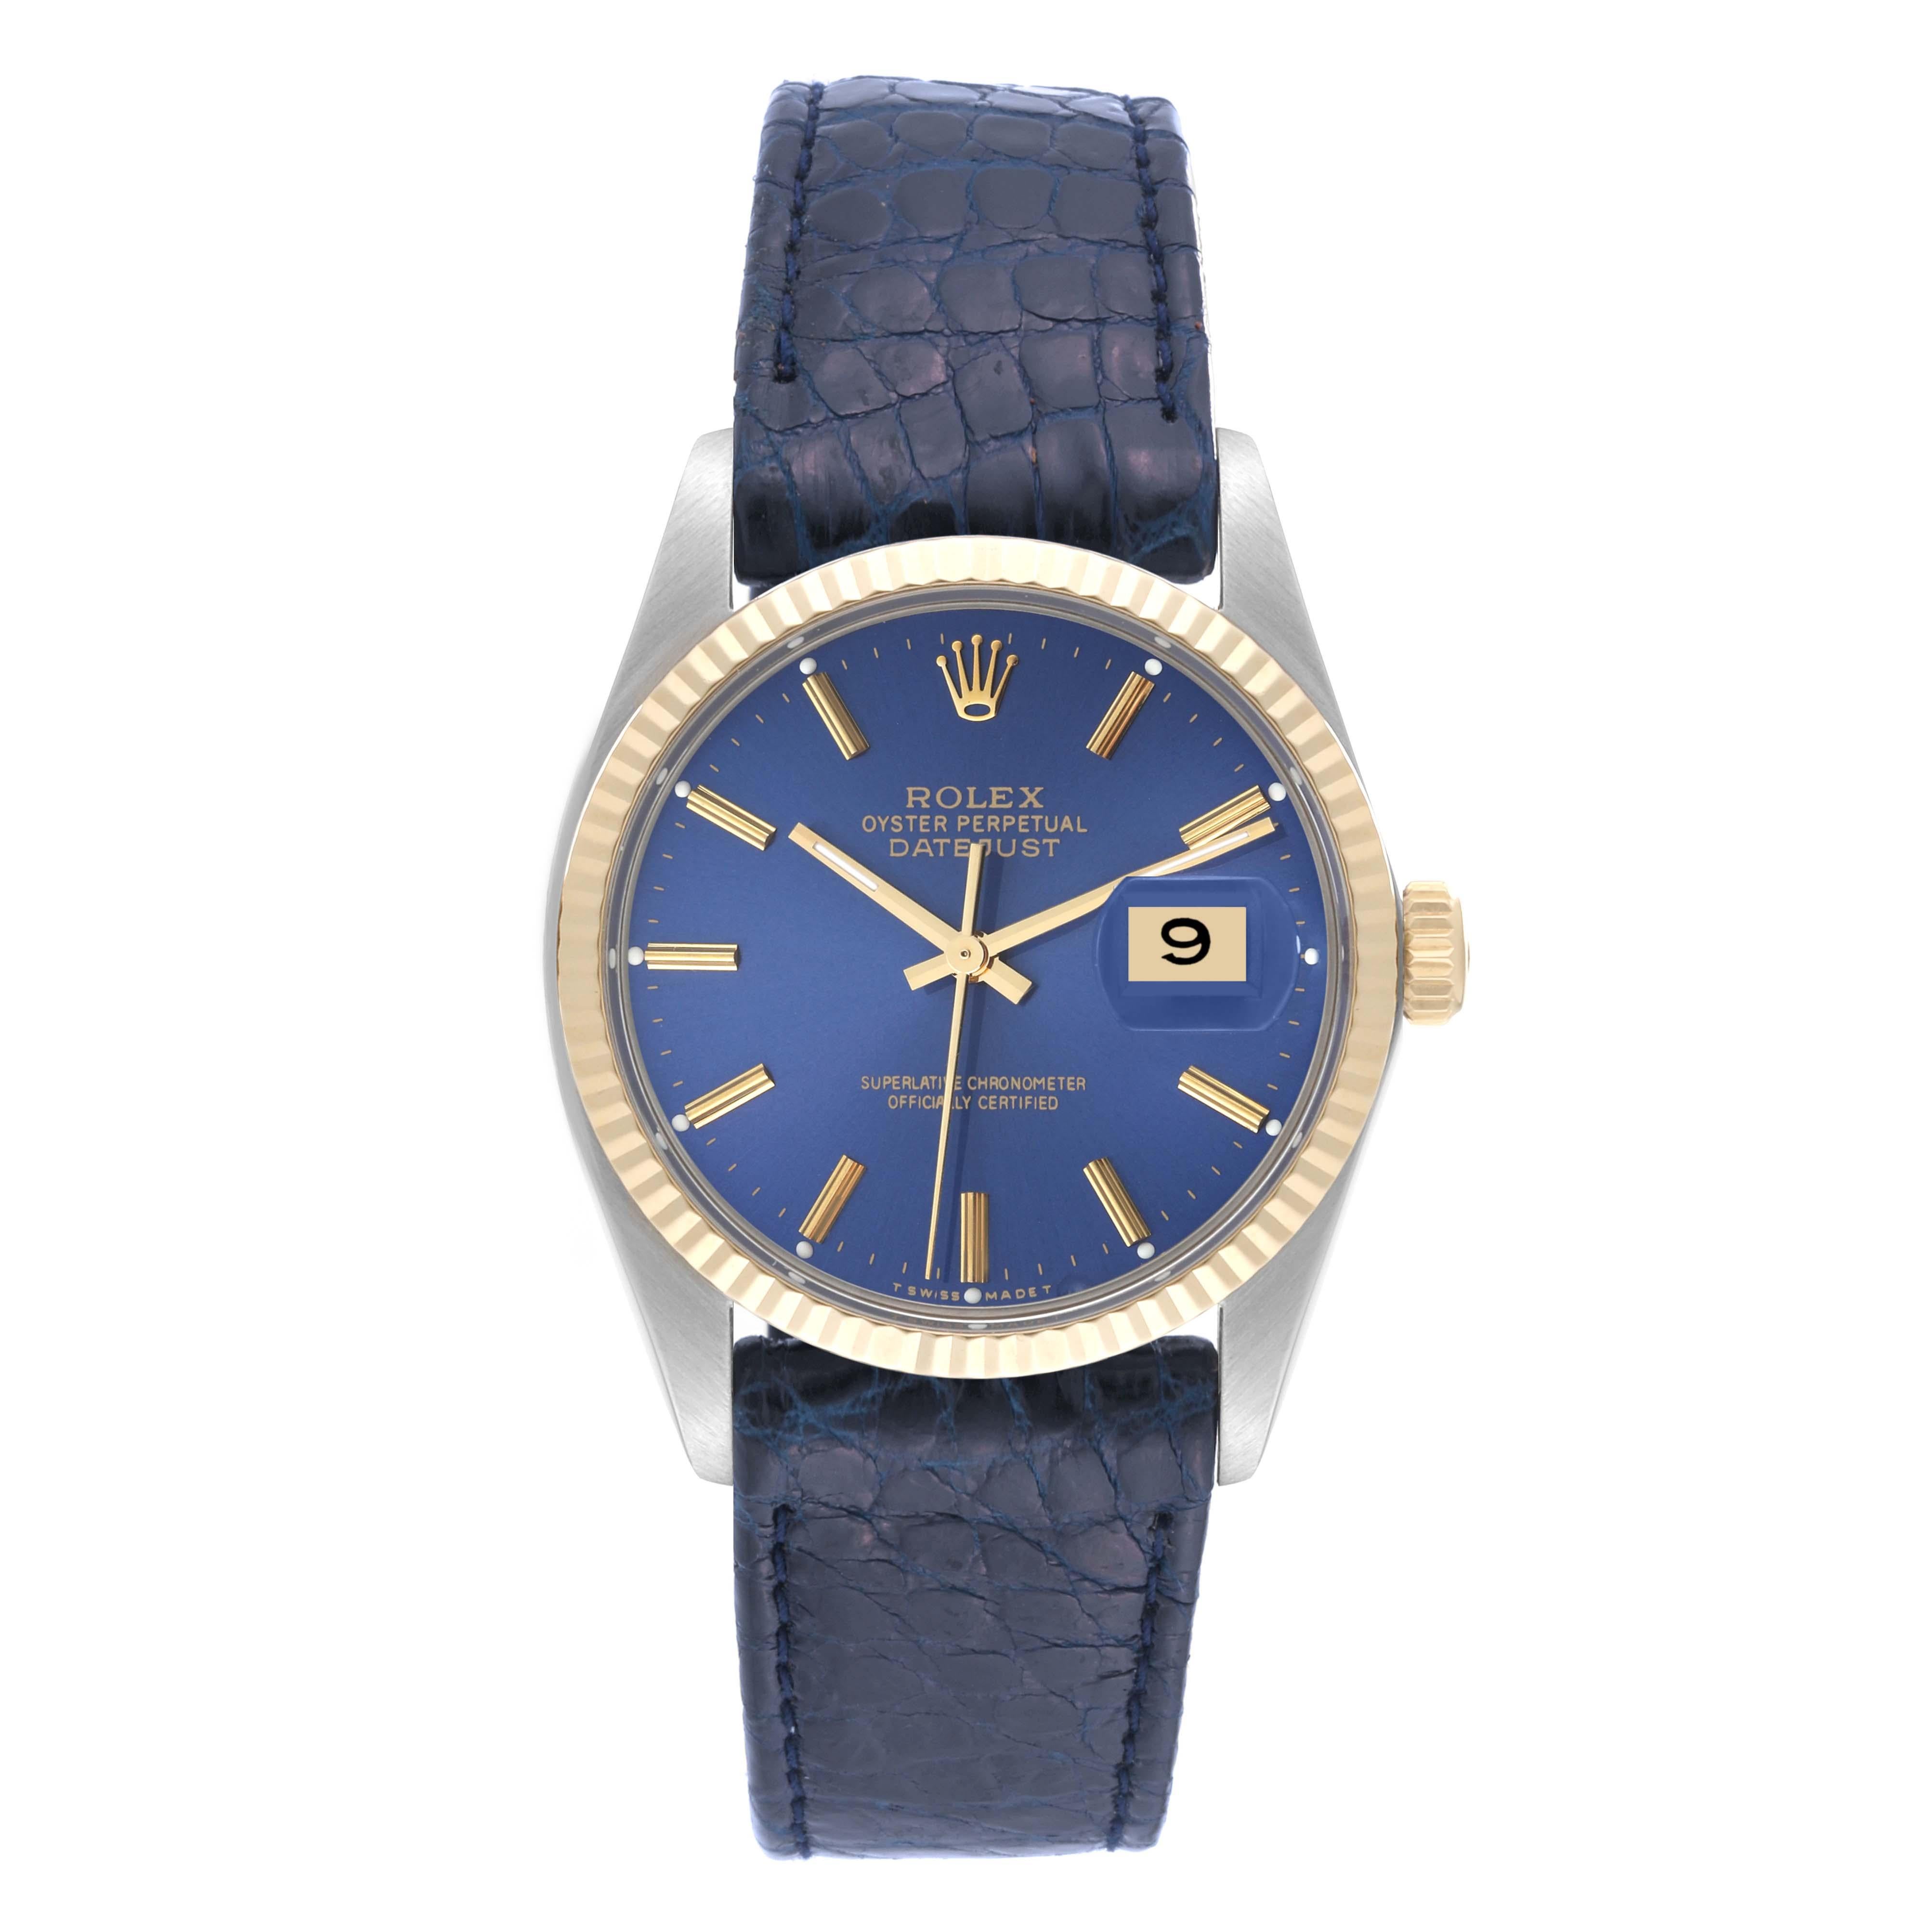 Rolex Datejust Steel Yellow Gold Blue Dial Vintage Mens Watch 16013 2